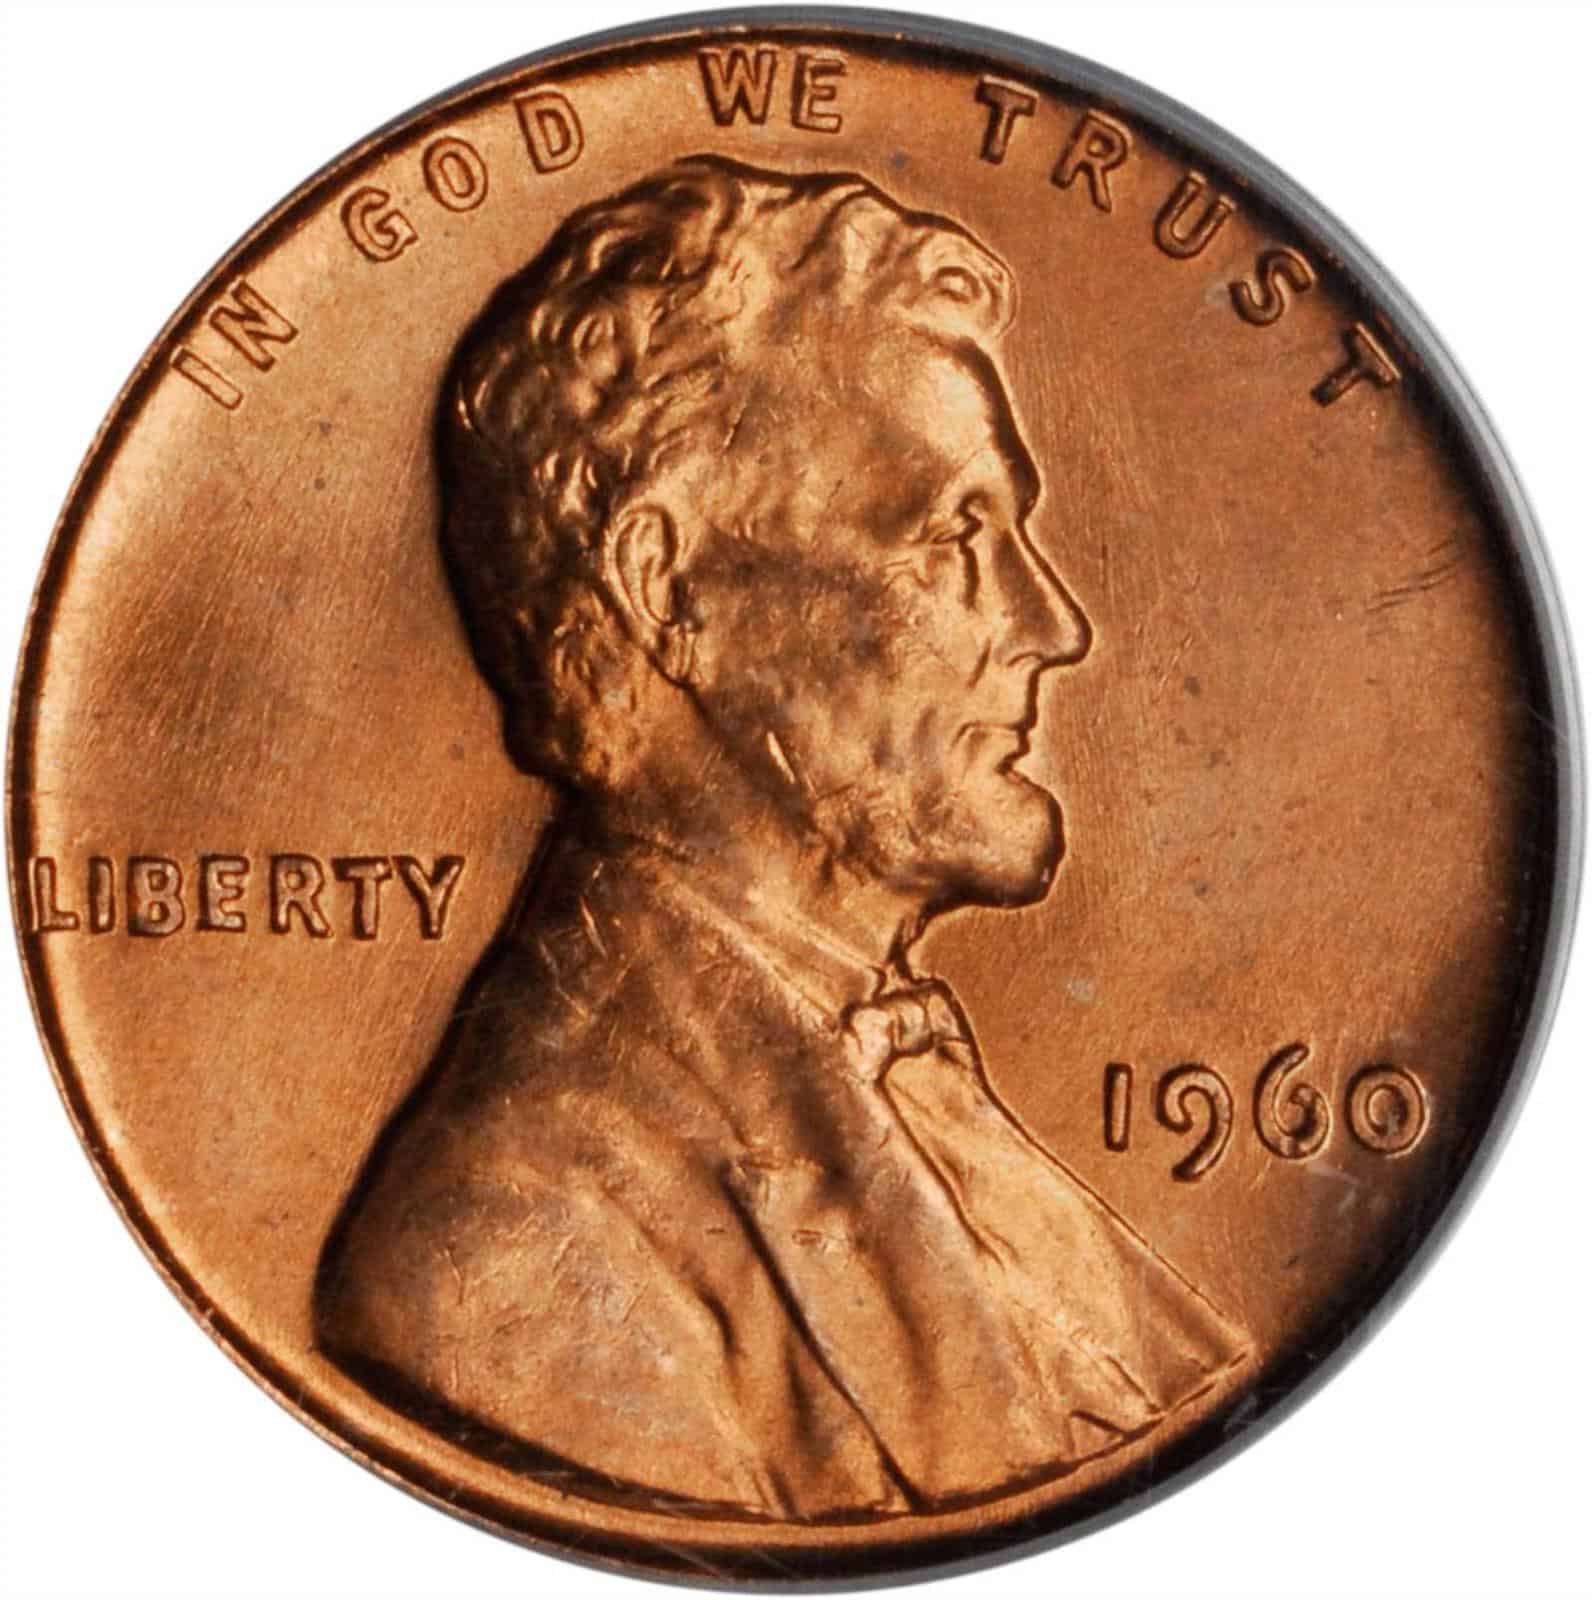 The obverse of the 1960 Lincoln Memorial penny